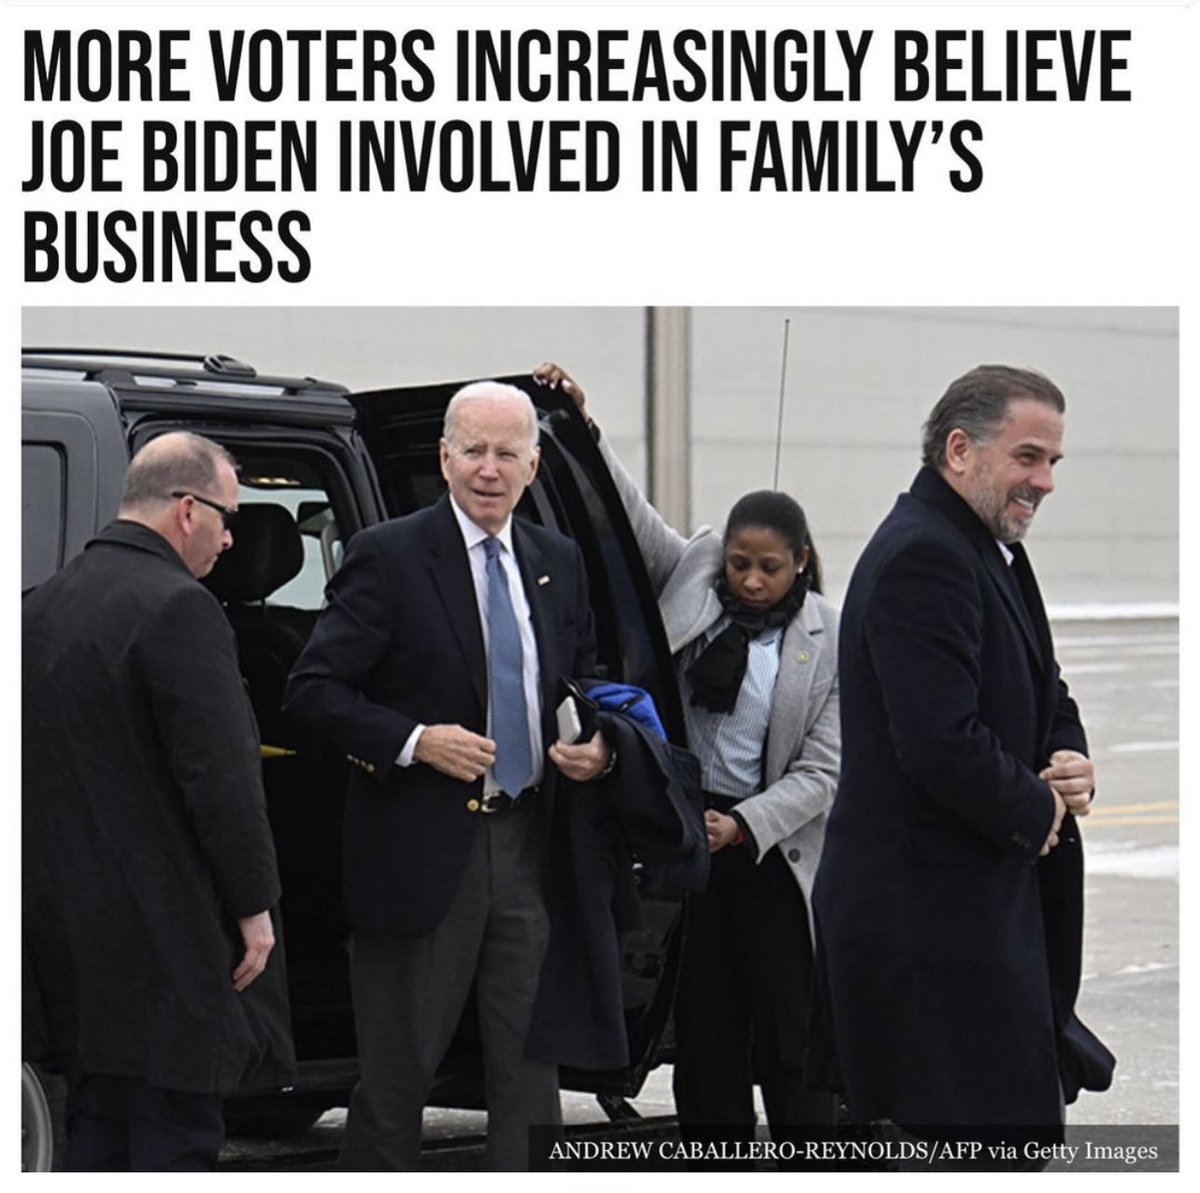 The Biden Crime Family is real.